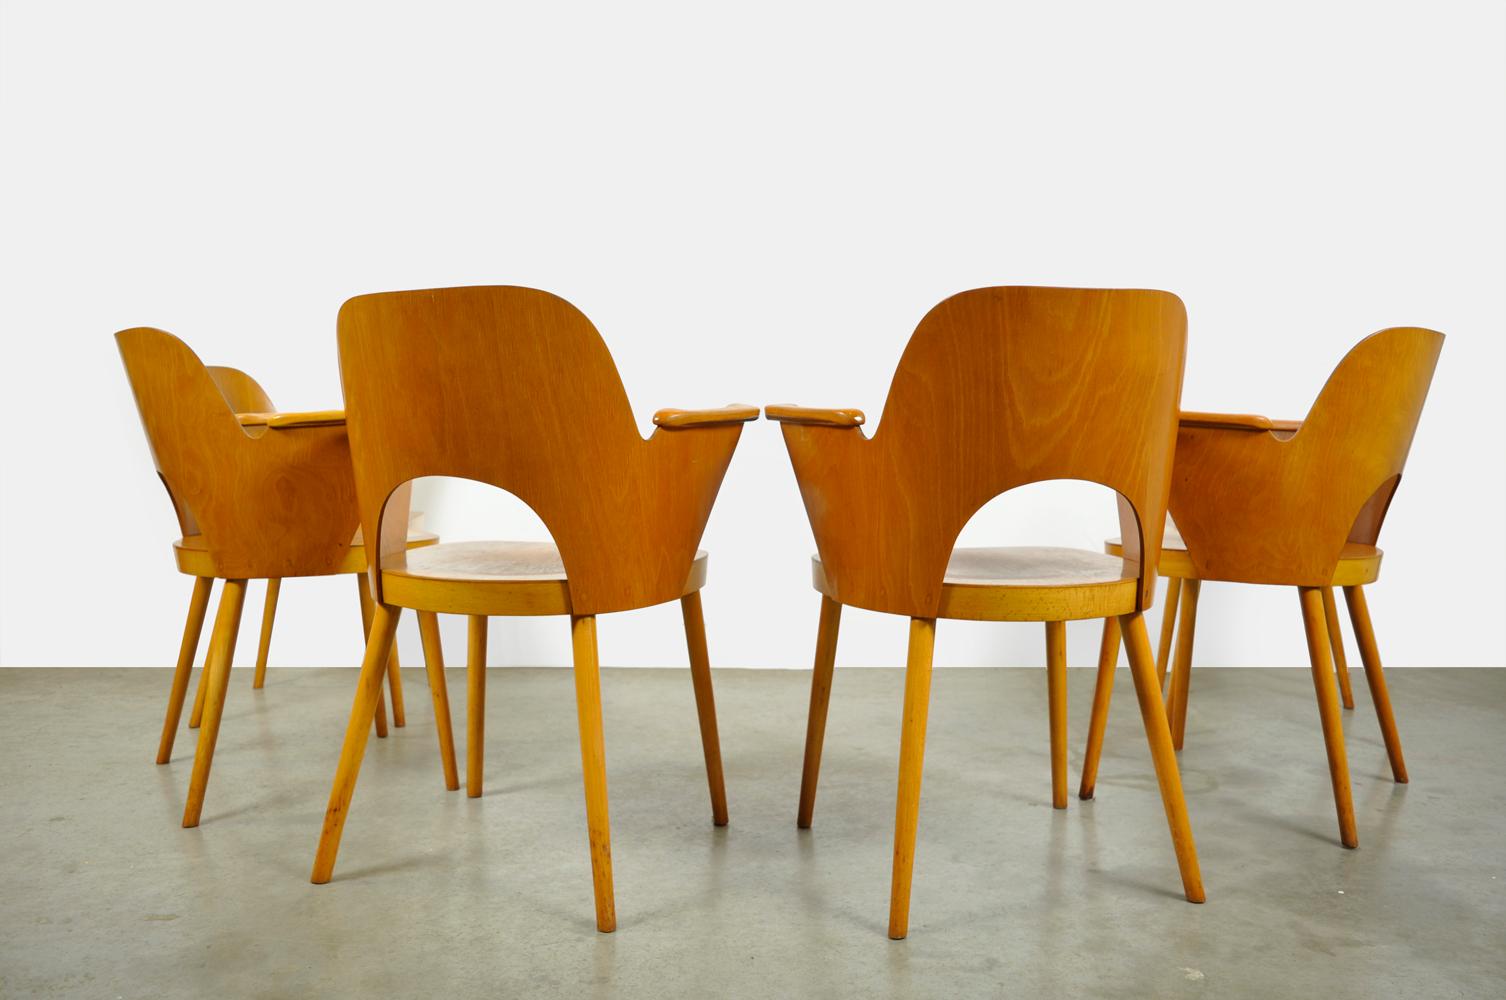 Rare set (6) beech dining table chairs designed by the Austrian designer Oswald Haerdtl and produced by Ton (Thonet) in the former Czechoslovakia 1950s. Characteristic beech wood chairs, No515 with curved backrest, molded seats and graceful